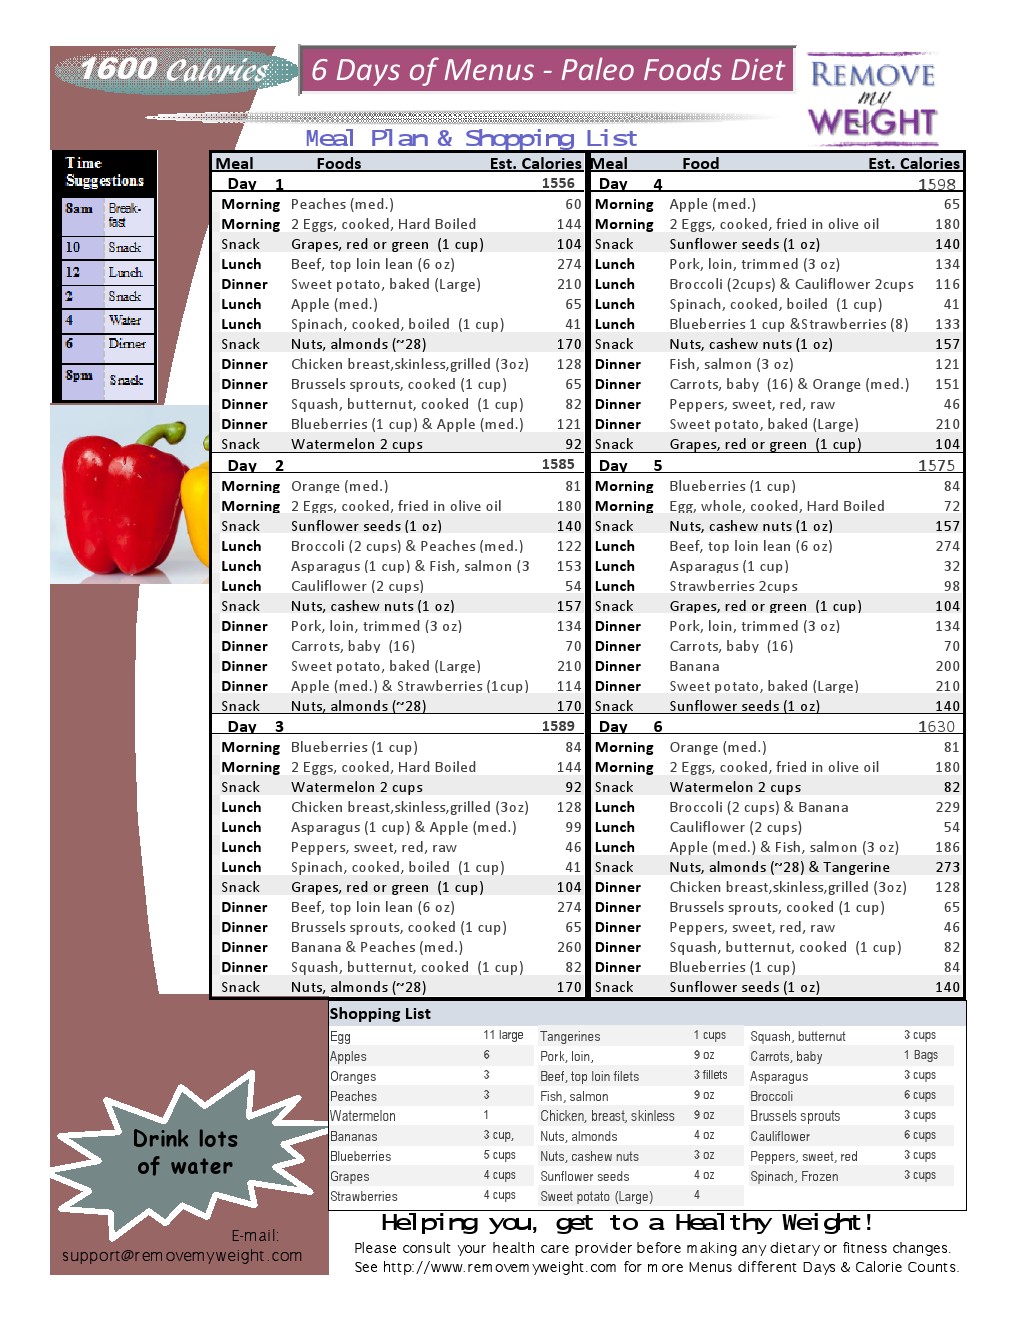 ... Paleo Diet with Shoppong List - Printable - Menu Plan for Weight Loss